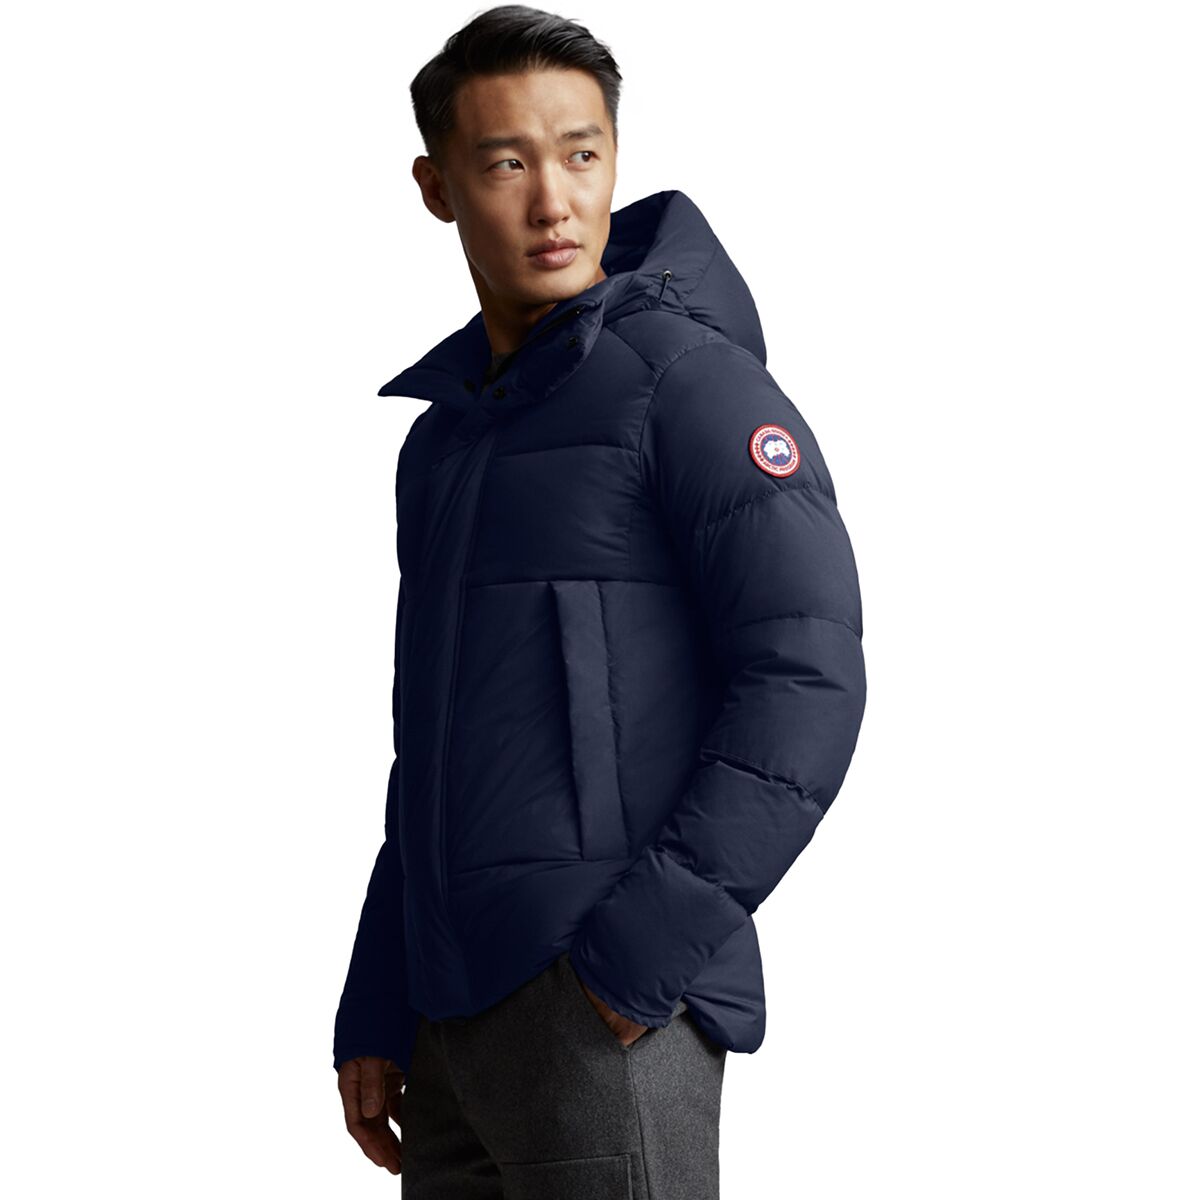 Armstrong Hooded Jacket - Men